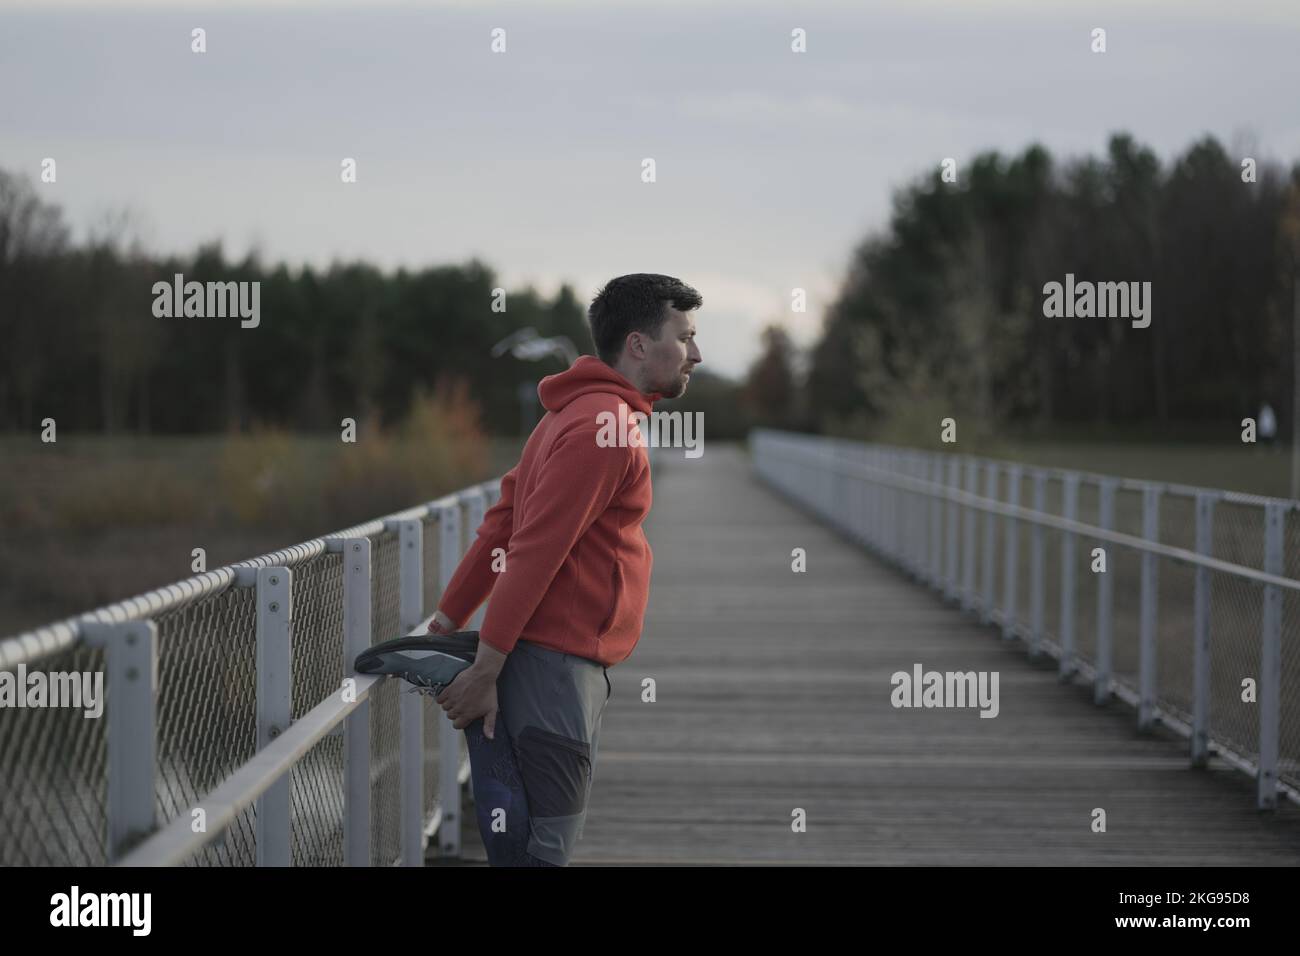 Man in orange and warm clothes warming up before jogging outdoors in cold autumn weather on wooden bridge. Runner stretching muscles leg and feet and Stock Photo